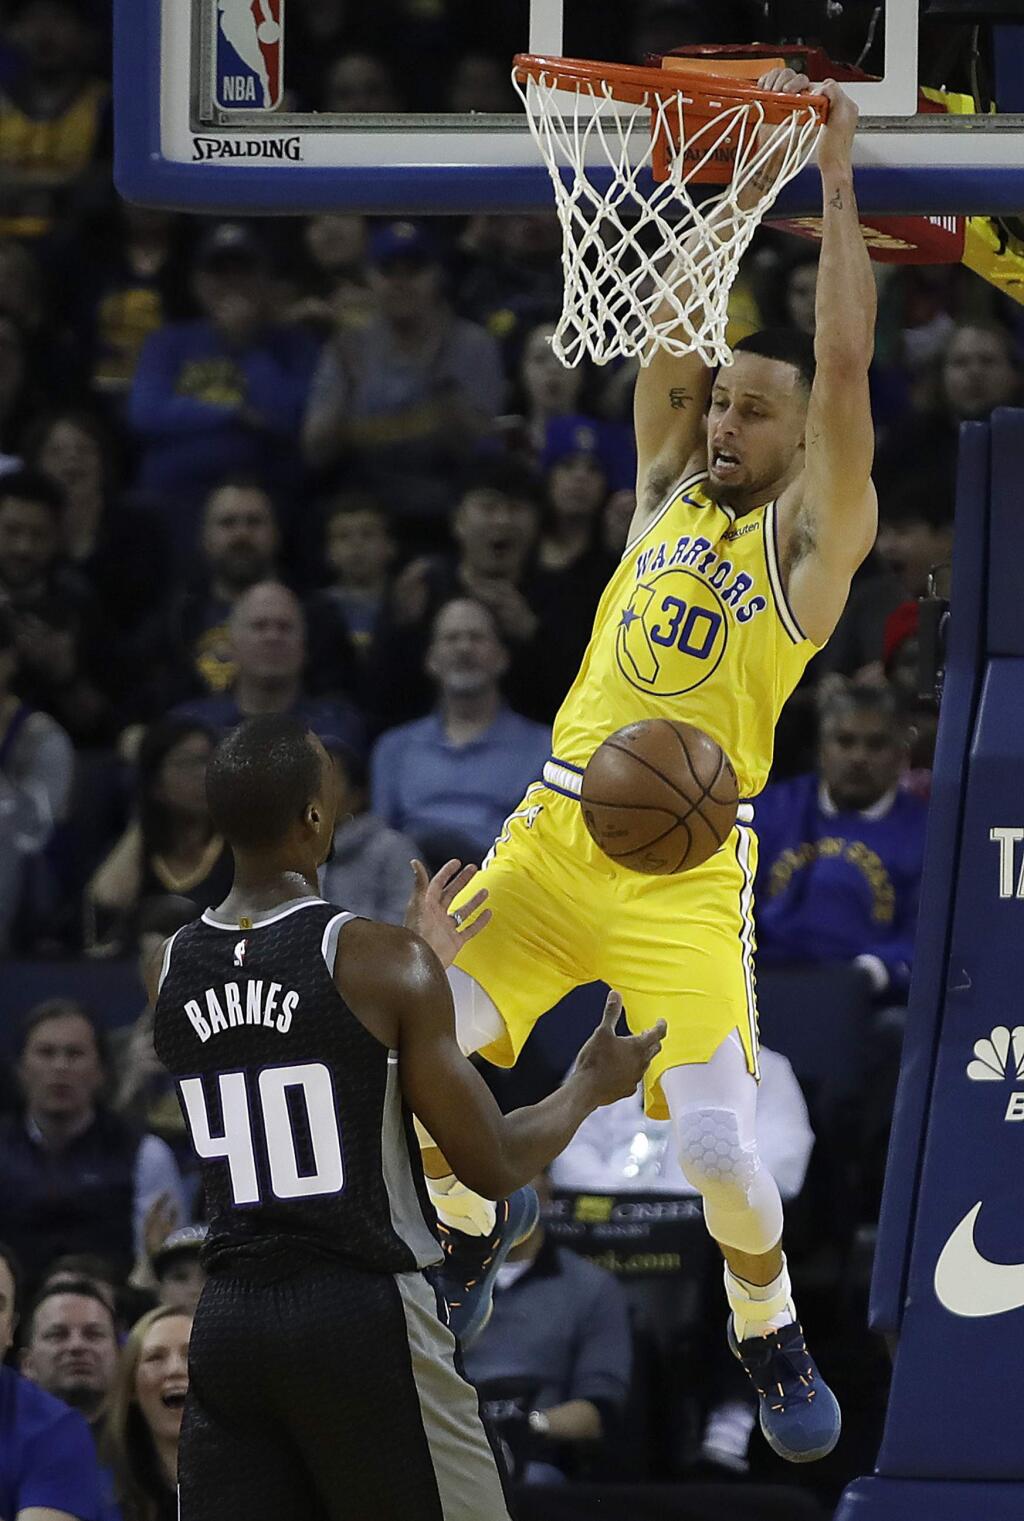 The Golden State Warriors' Stephen Curry, right, scores over the Sacramento Kings' Harrison Barnes during the first half, Thursday, Feb. 21, 2019, in Oakland. (AP Photo/Ben Margot)